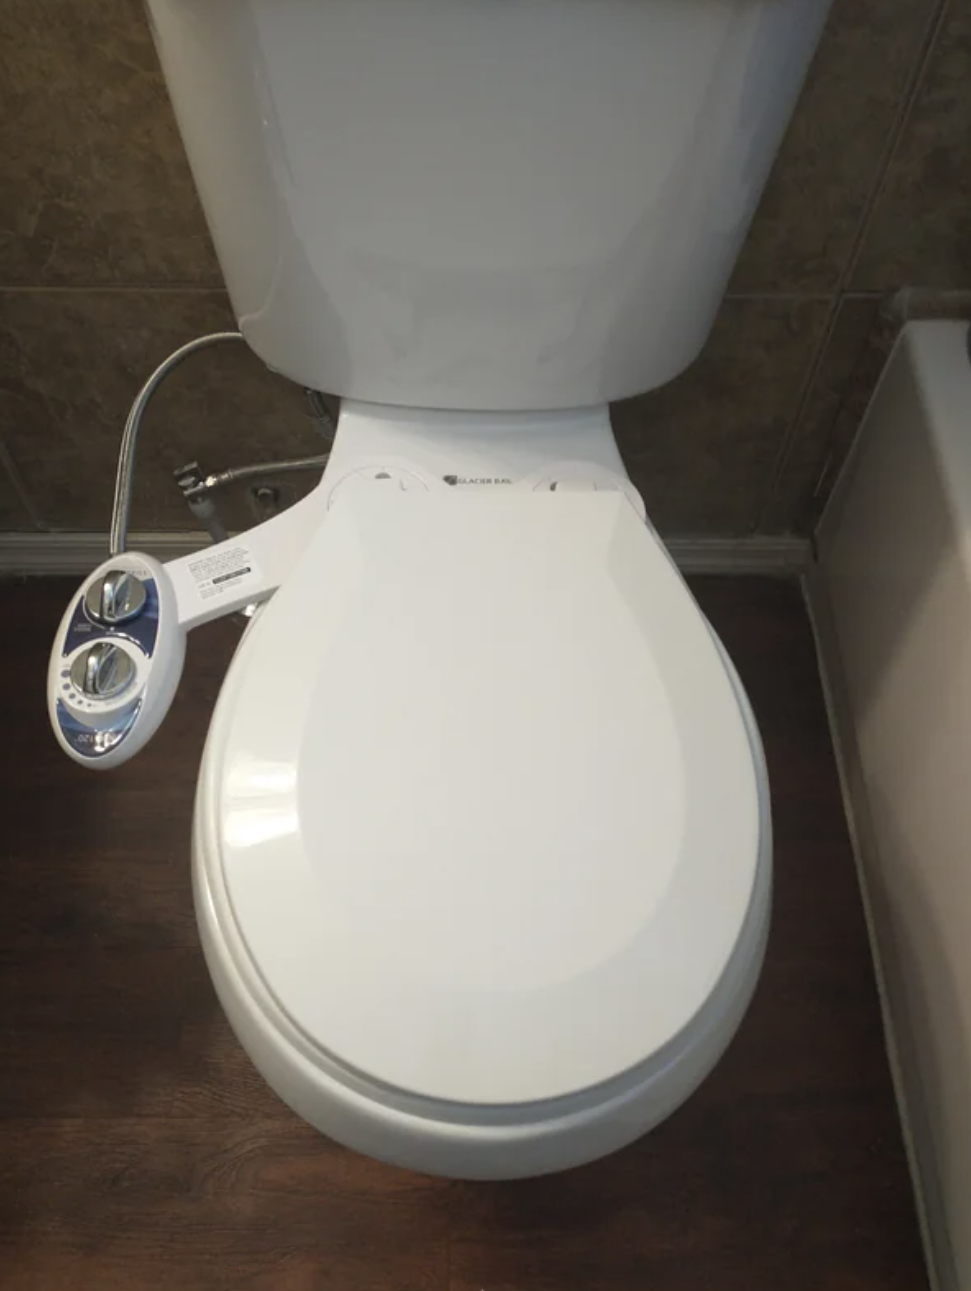 Toilet with attached bidet featuring a self-cleaning nozzle